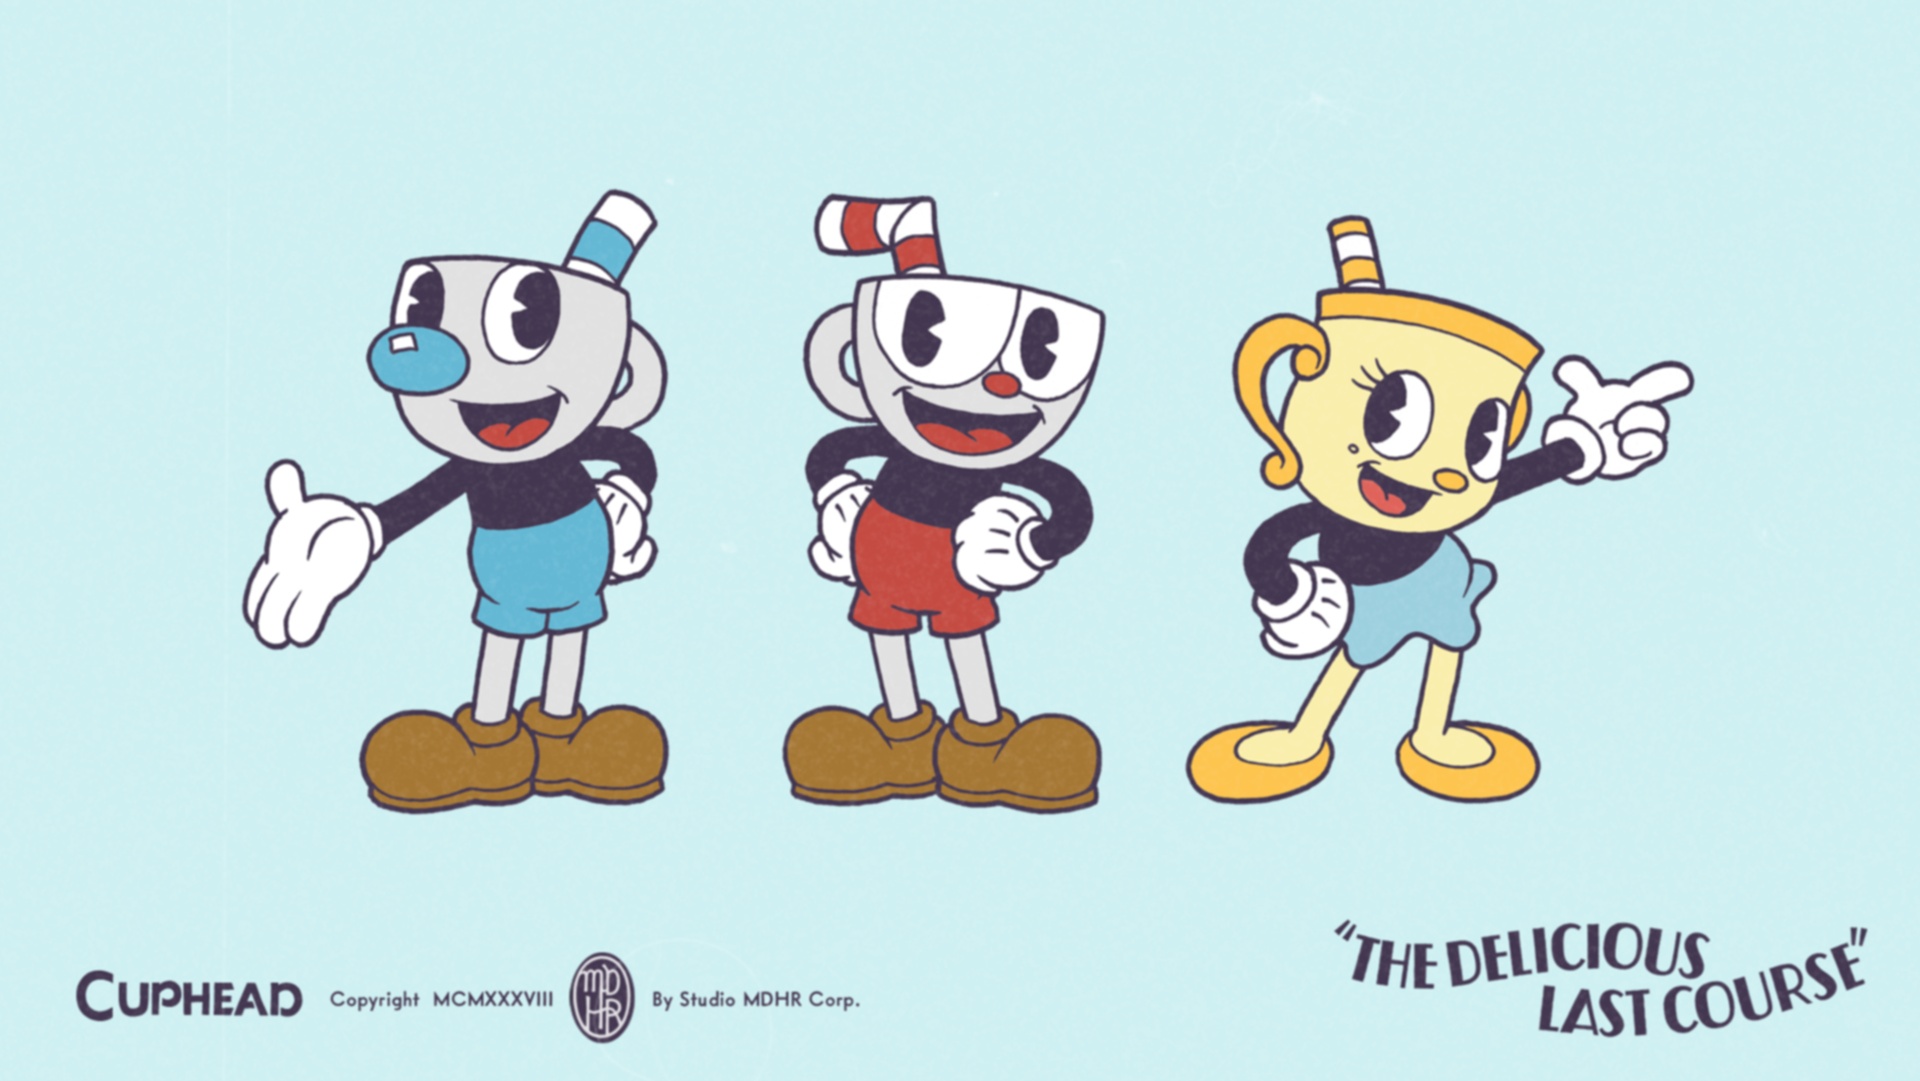 Your First Bite of The Delicious Last Course with an Update from Studio MDHR on Cuphead DLC